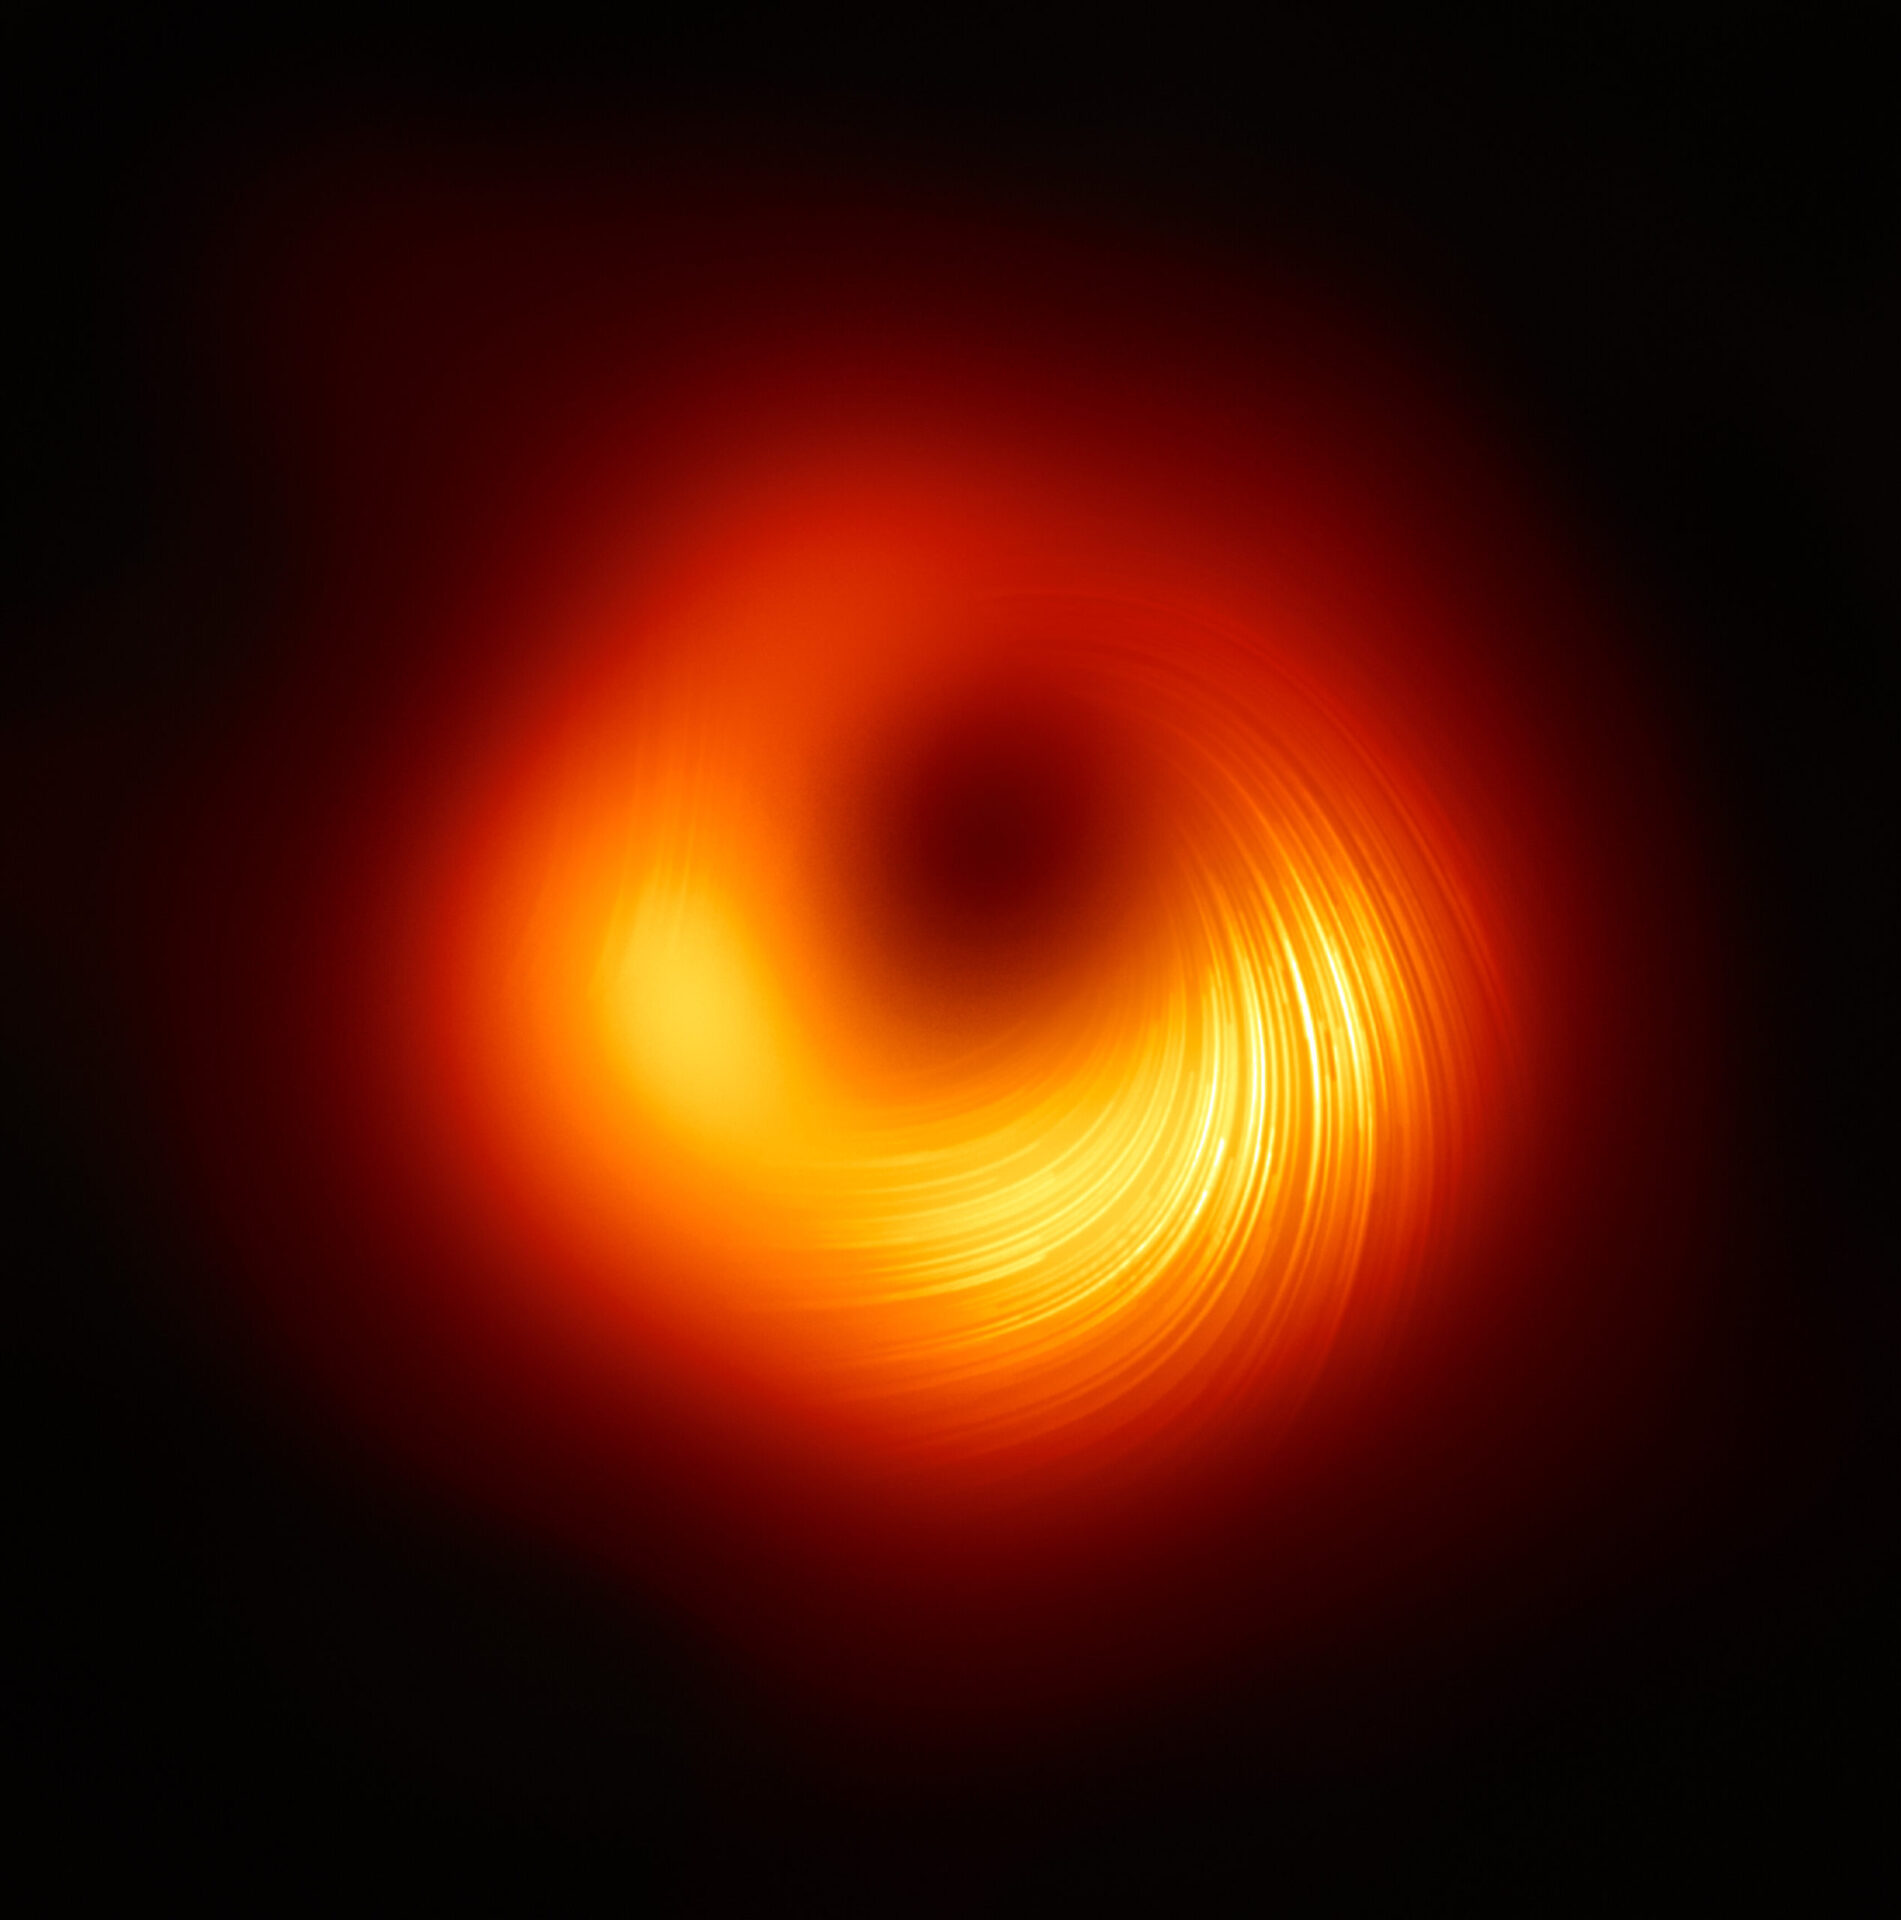 The Event Horizon Telescope (EHT) collaboration, who produced the first ever image of a black hole released in 2019, has today a new view of the massive object at the centre of the Messier 87 (M87) galaxy: how it looks in polarised light. This is the first time astronomers have been able to measure polarisation, a signature of magnetic fields, this close to the edge of a black hole. This image shows the polarised view of the black hole in M87. The lines mark the orientation of polarisation, which is related to the magnetic field around the shadow of the black hole. Credit: EHT Collaboration